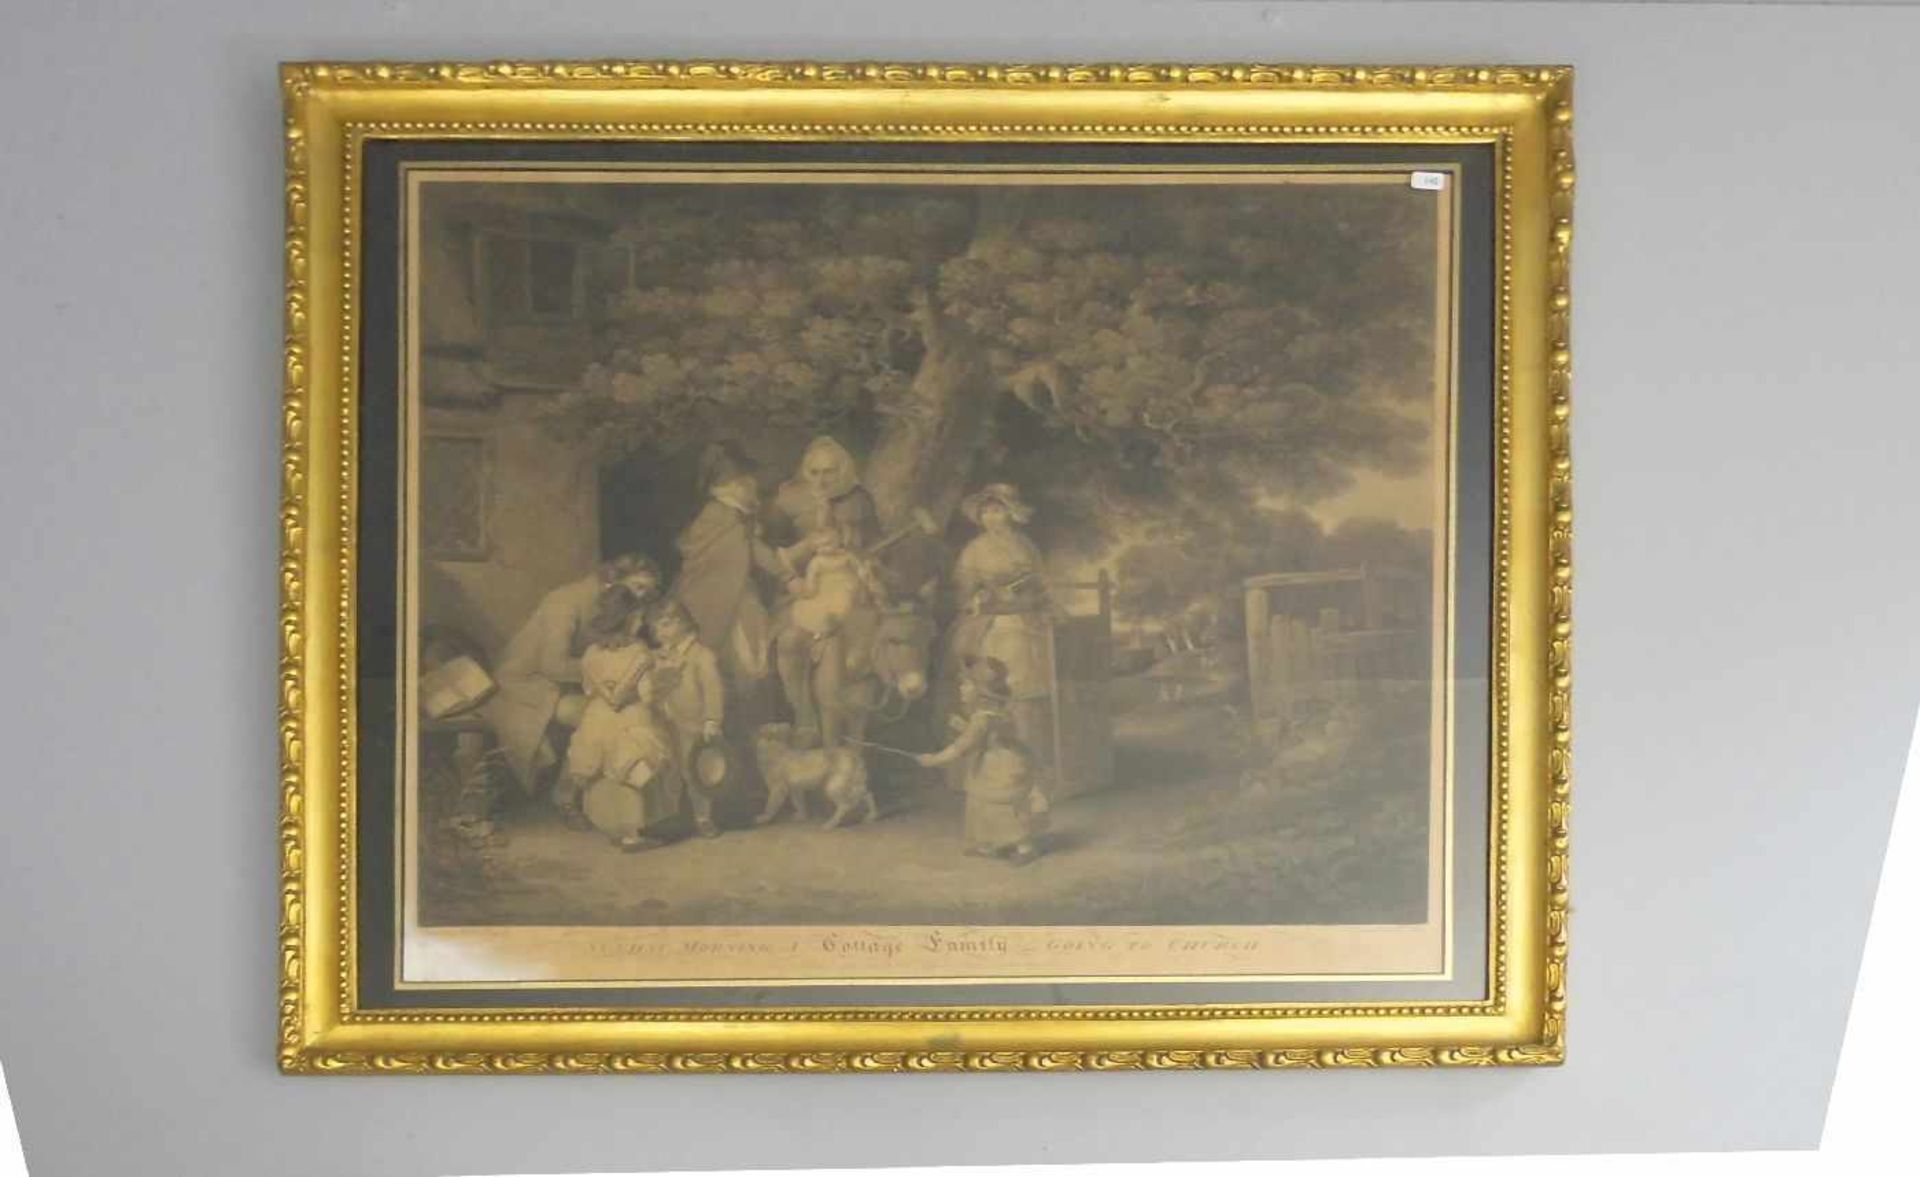 NUTTER, WILLIAM (1754-1802), Radierung: "Sunday Morning, A Cottage Family Going To Church",